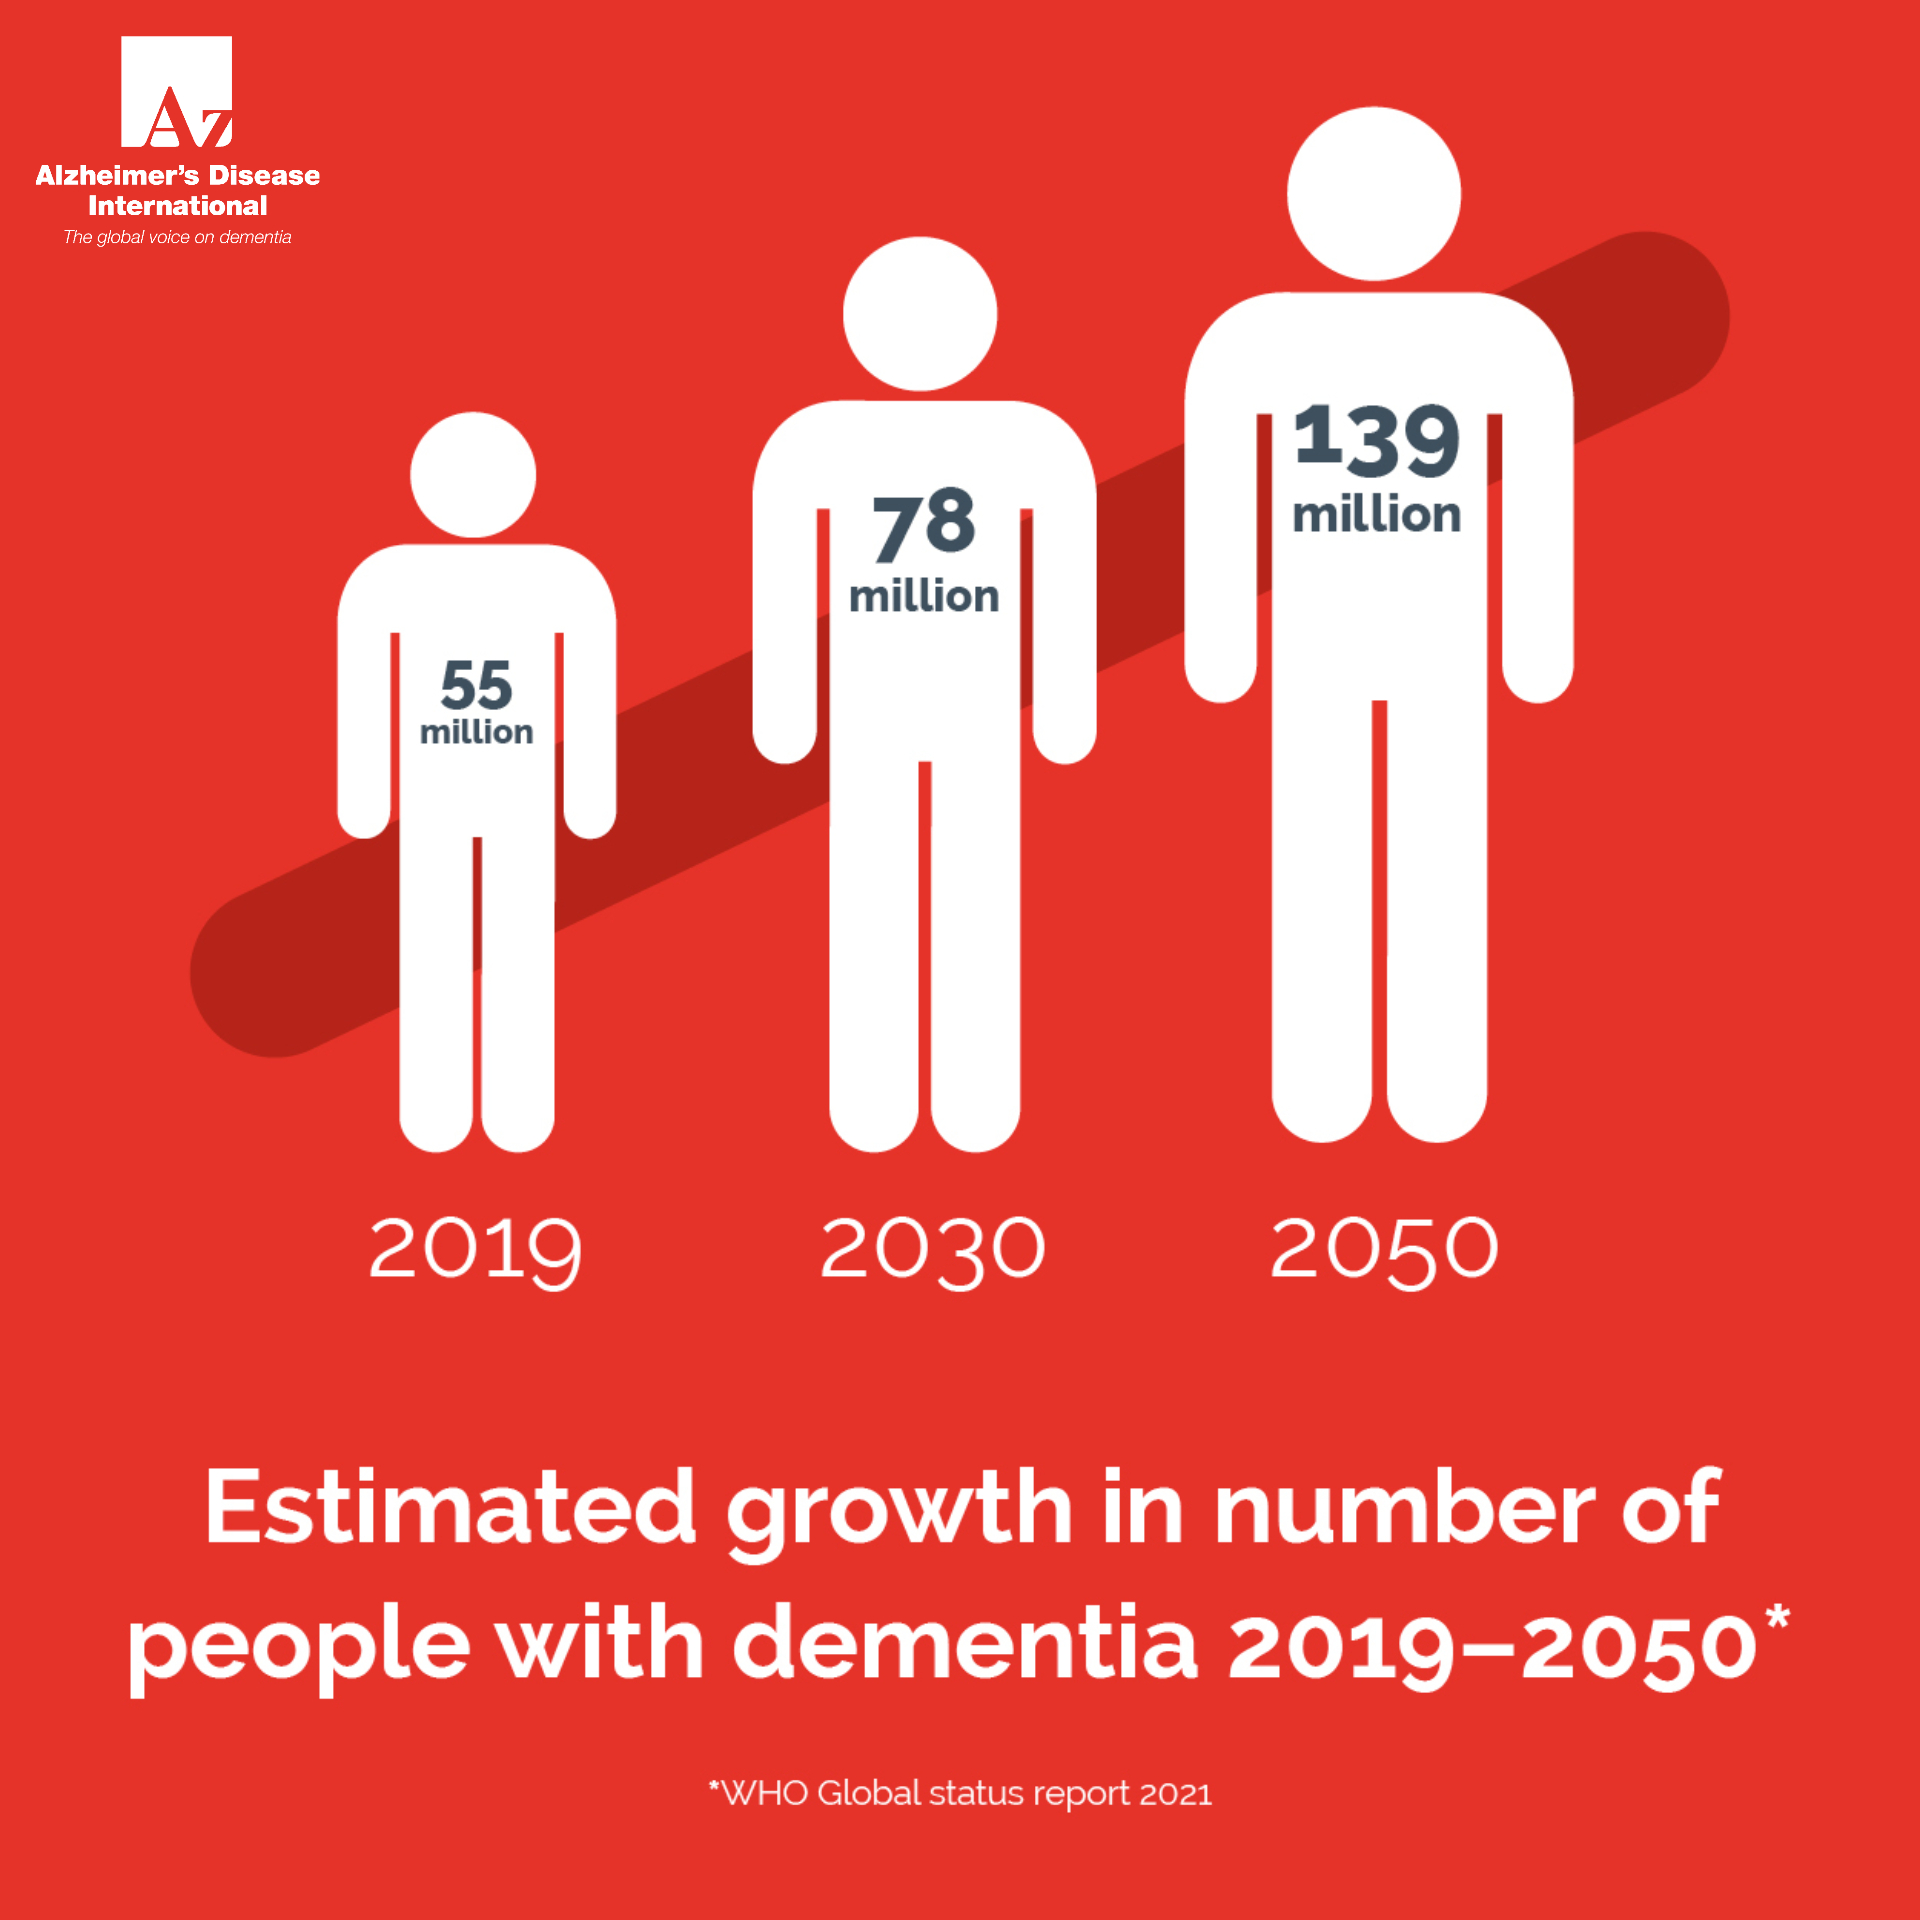 Estimated growth in number of people with dementia 2019 to 2050